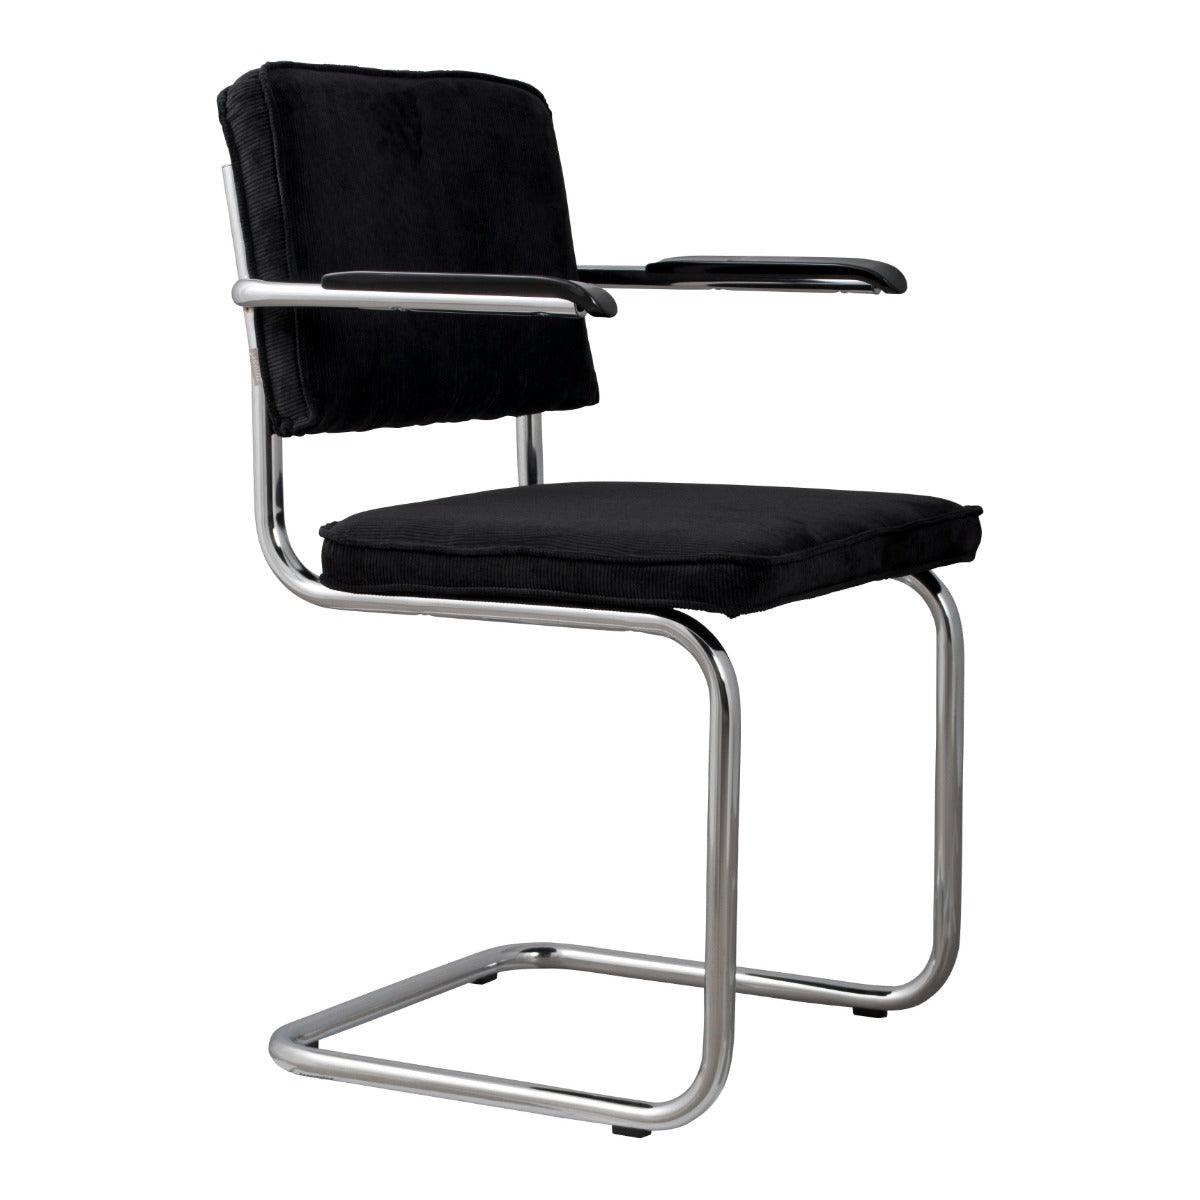 The Ride Kink chair has a classic, nostalgic character, but its appearance and fabric are modern. It fits perfectly with the dining room and office, ensuring the highest comfort of use. The highest quality chrome frame and soft seat and back covered with a corduroy create a unity that will introduce elegance to your interior. The chair has been made in a way that promotes orderly storage, they can be easily recruited.